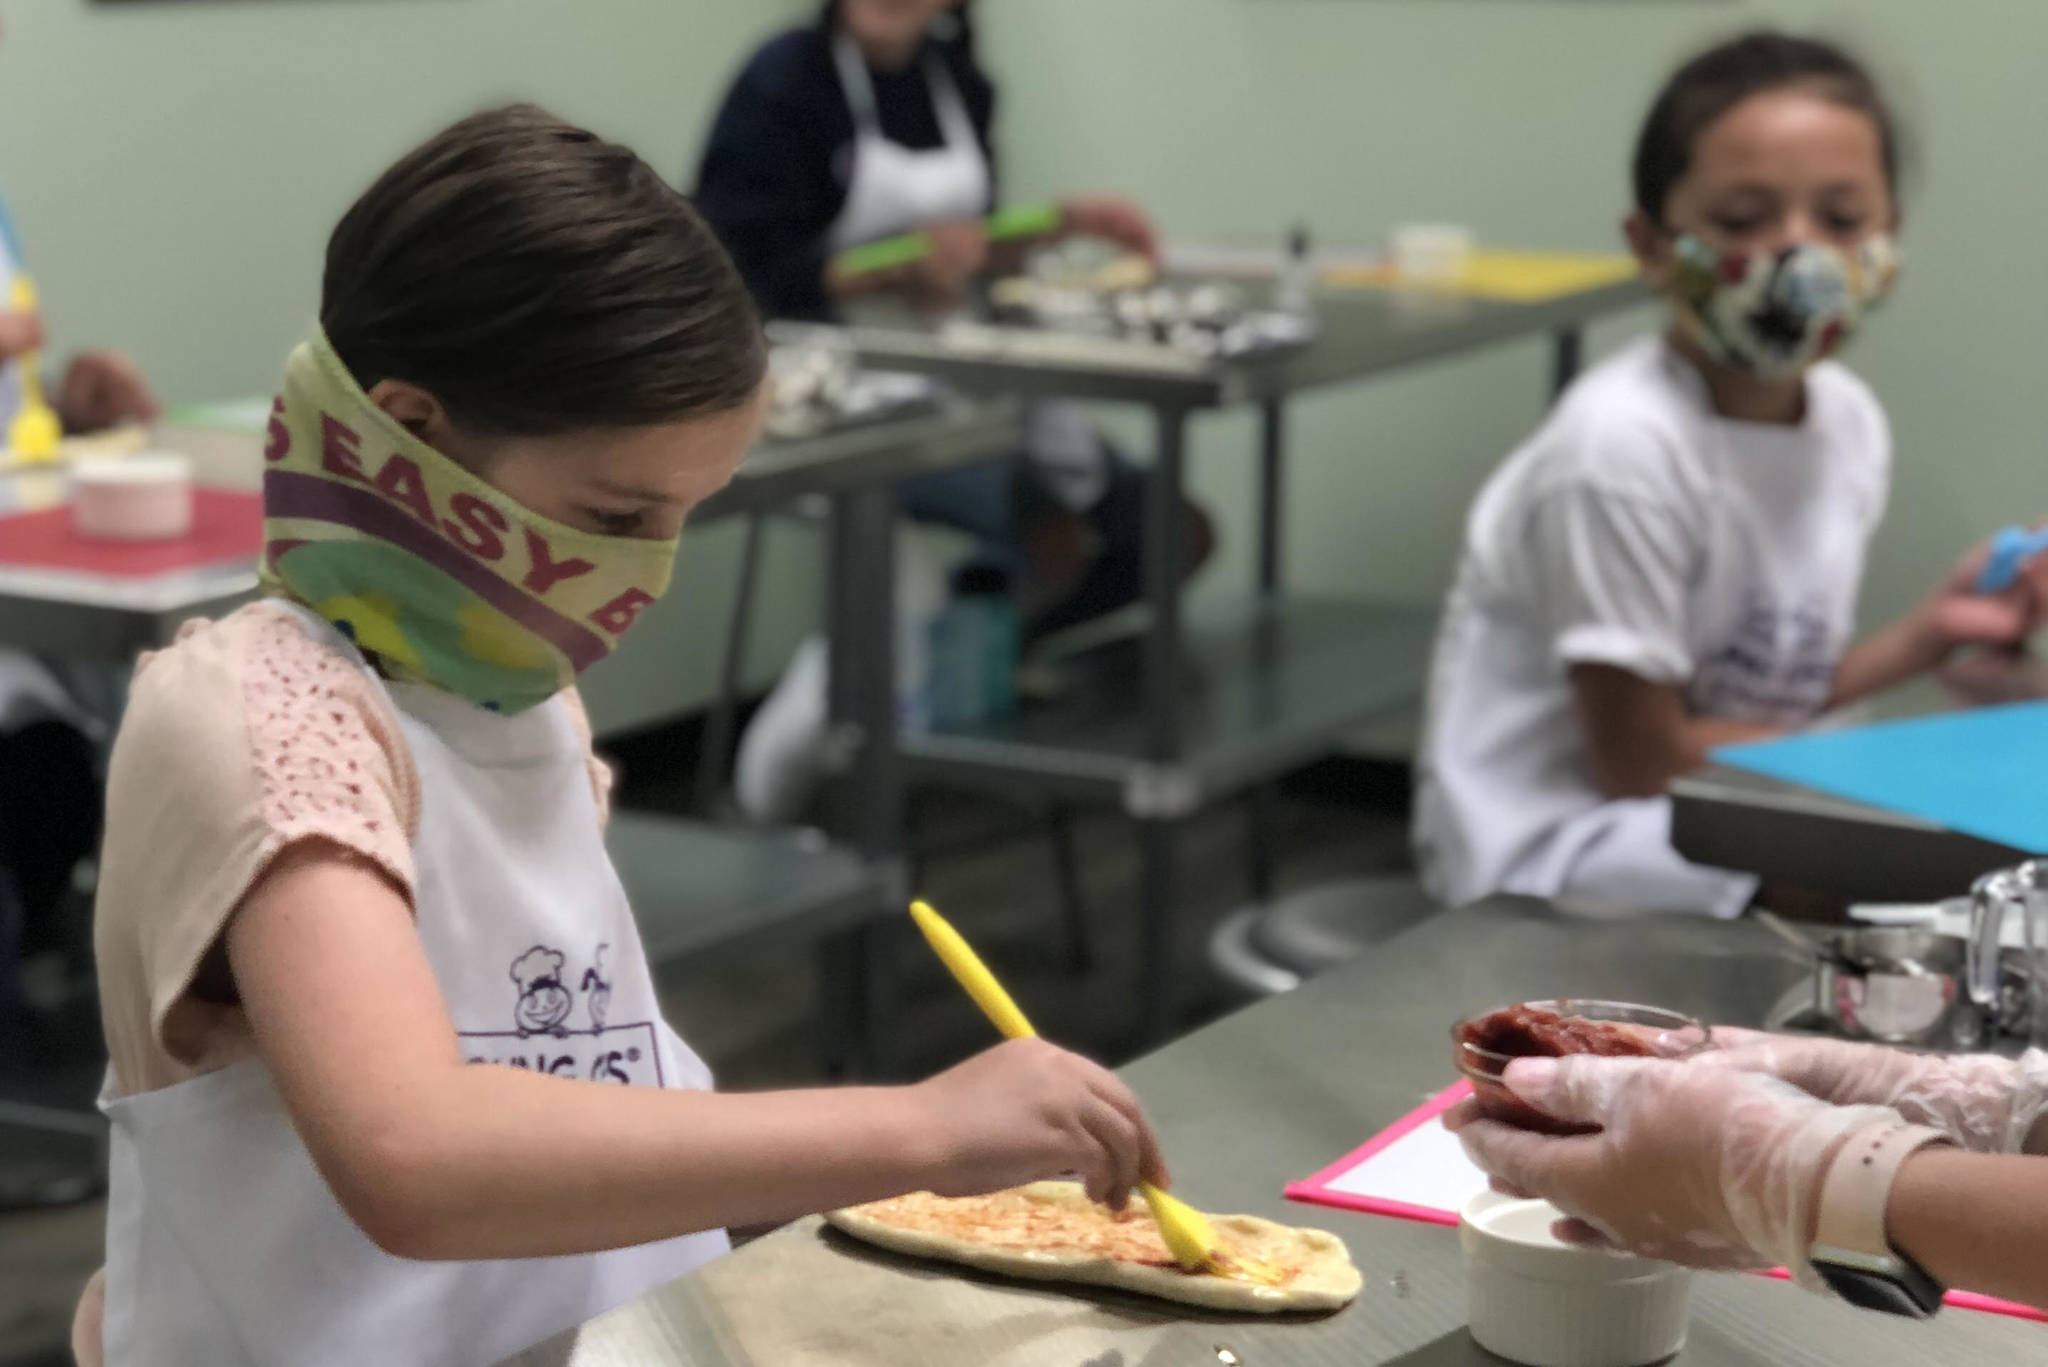 A young chef carefully spreads sauce onto pizza dough during a cooking class at Young Chefs Academy of Covington. Courtesy photo/YCA Covington